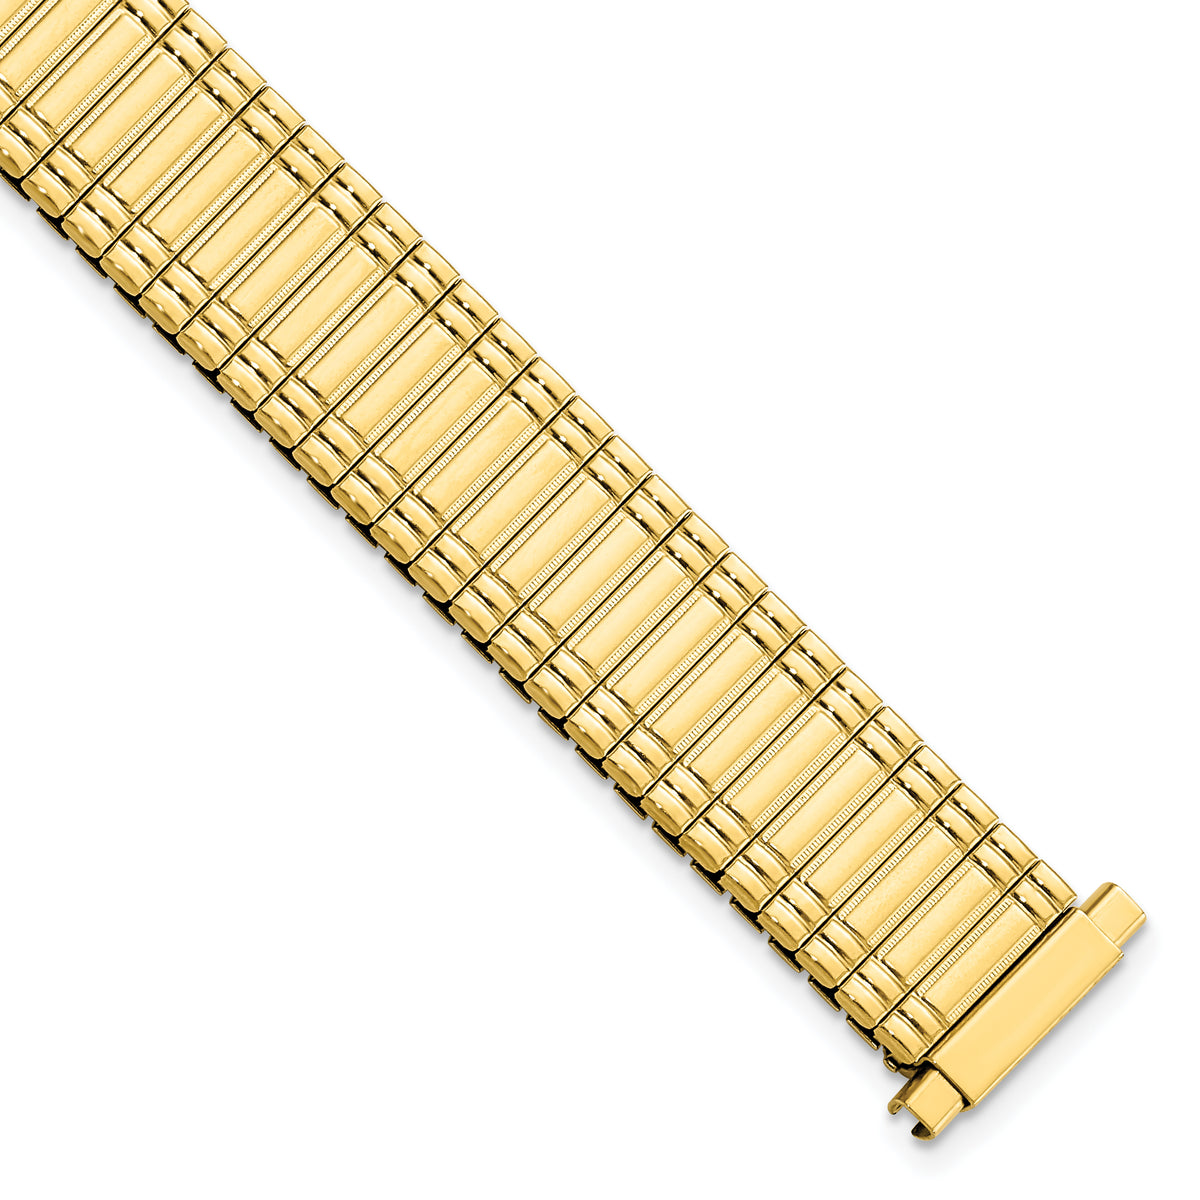 DeBeer 11-15mm Ladies Sanded and Polished Gold-tone Stainless Steel Thin-Flexo Expansion Link 6 inch Watch Band